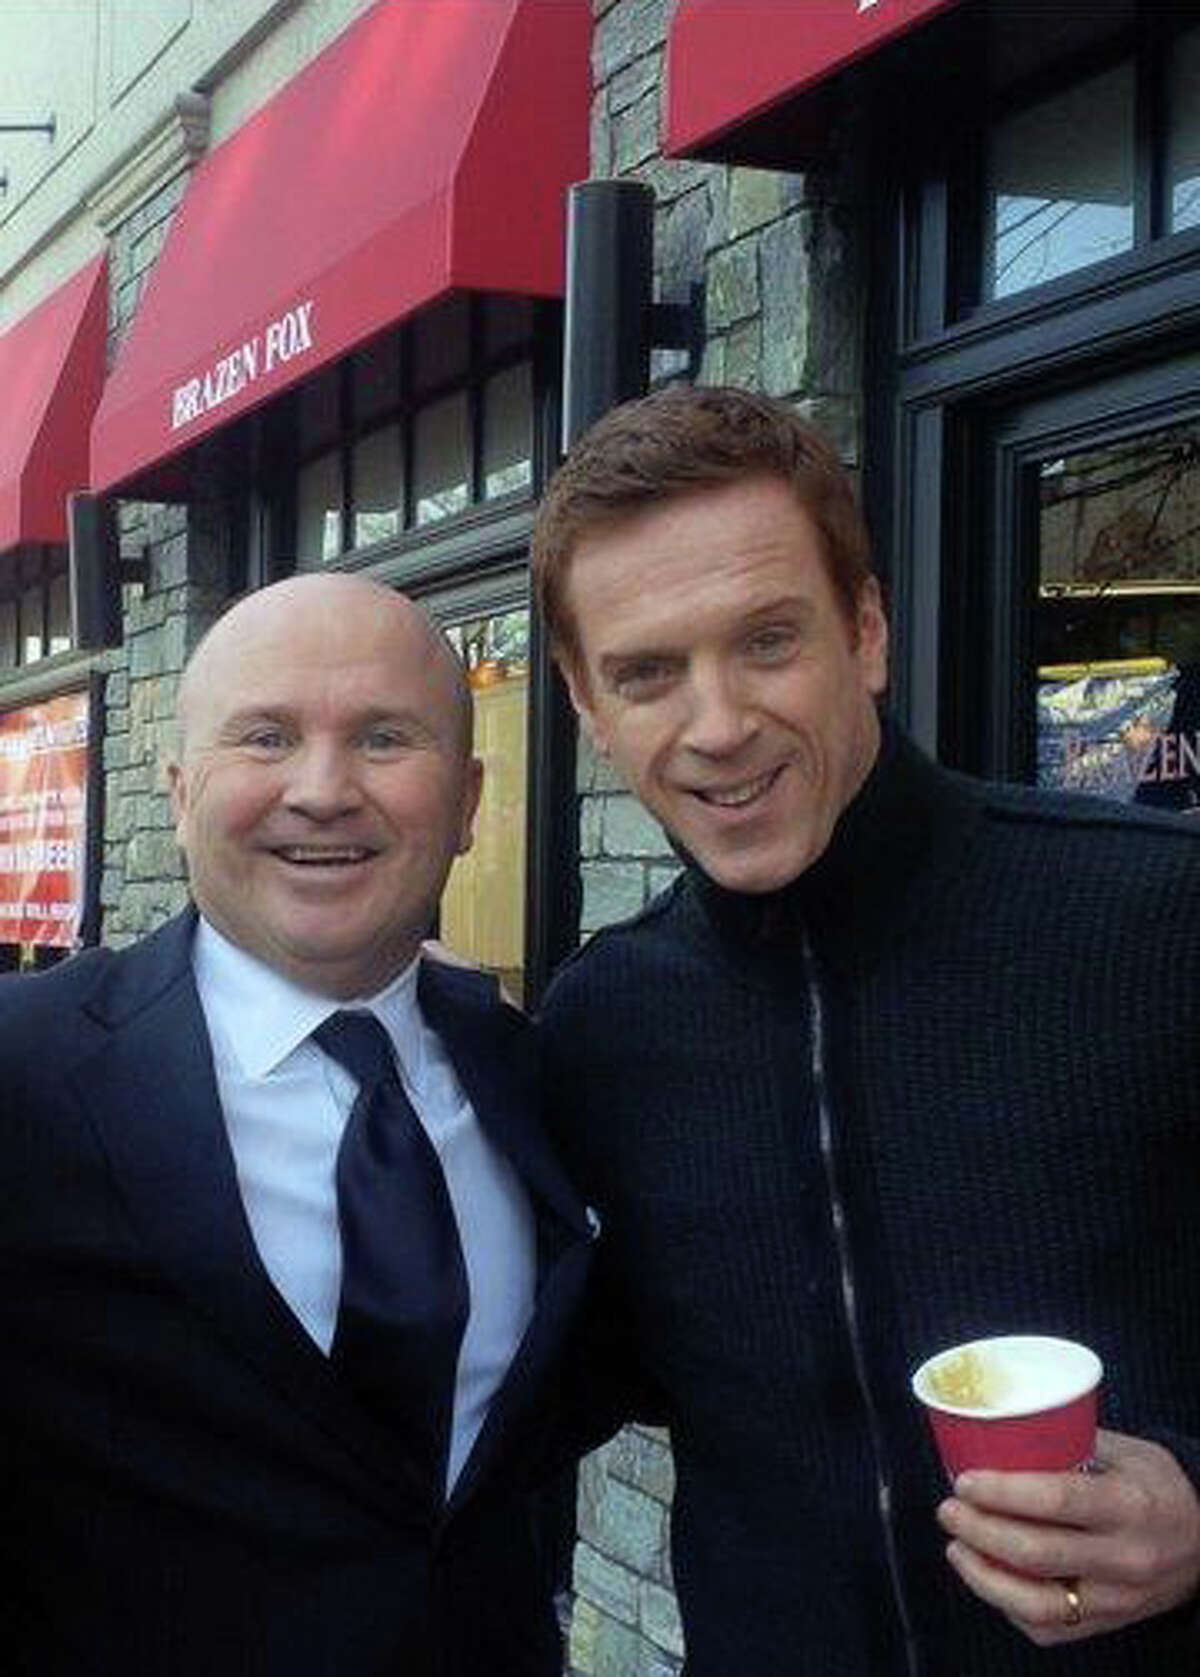 Tony Capasso, maitre d' and managing partner at Gabriele’s Italian Steakhouse in Greenwich, with actor Damien Lewis on the set of “Billions,” which premiers on Showtime.